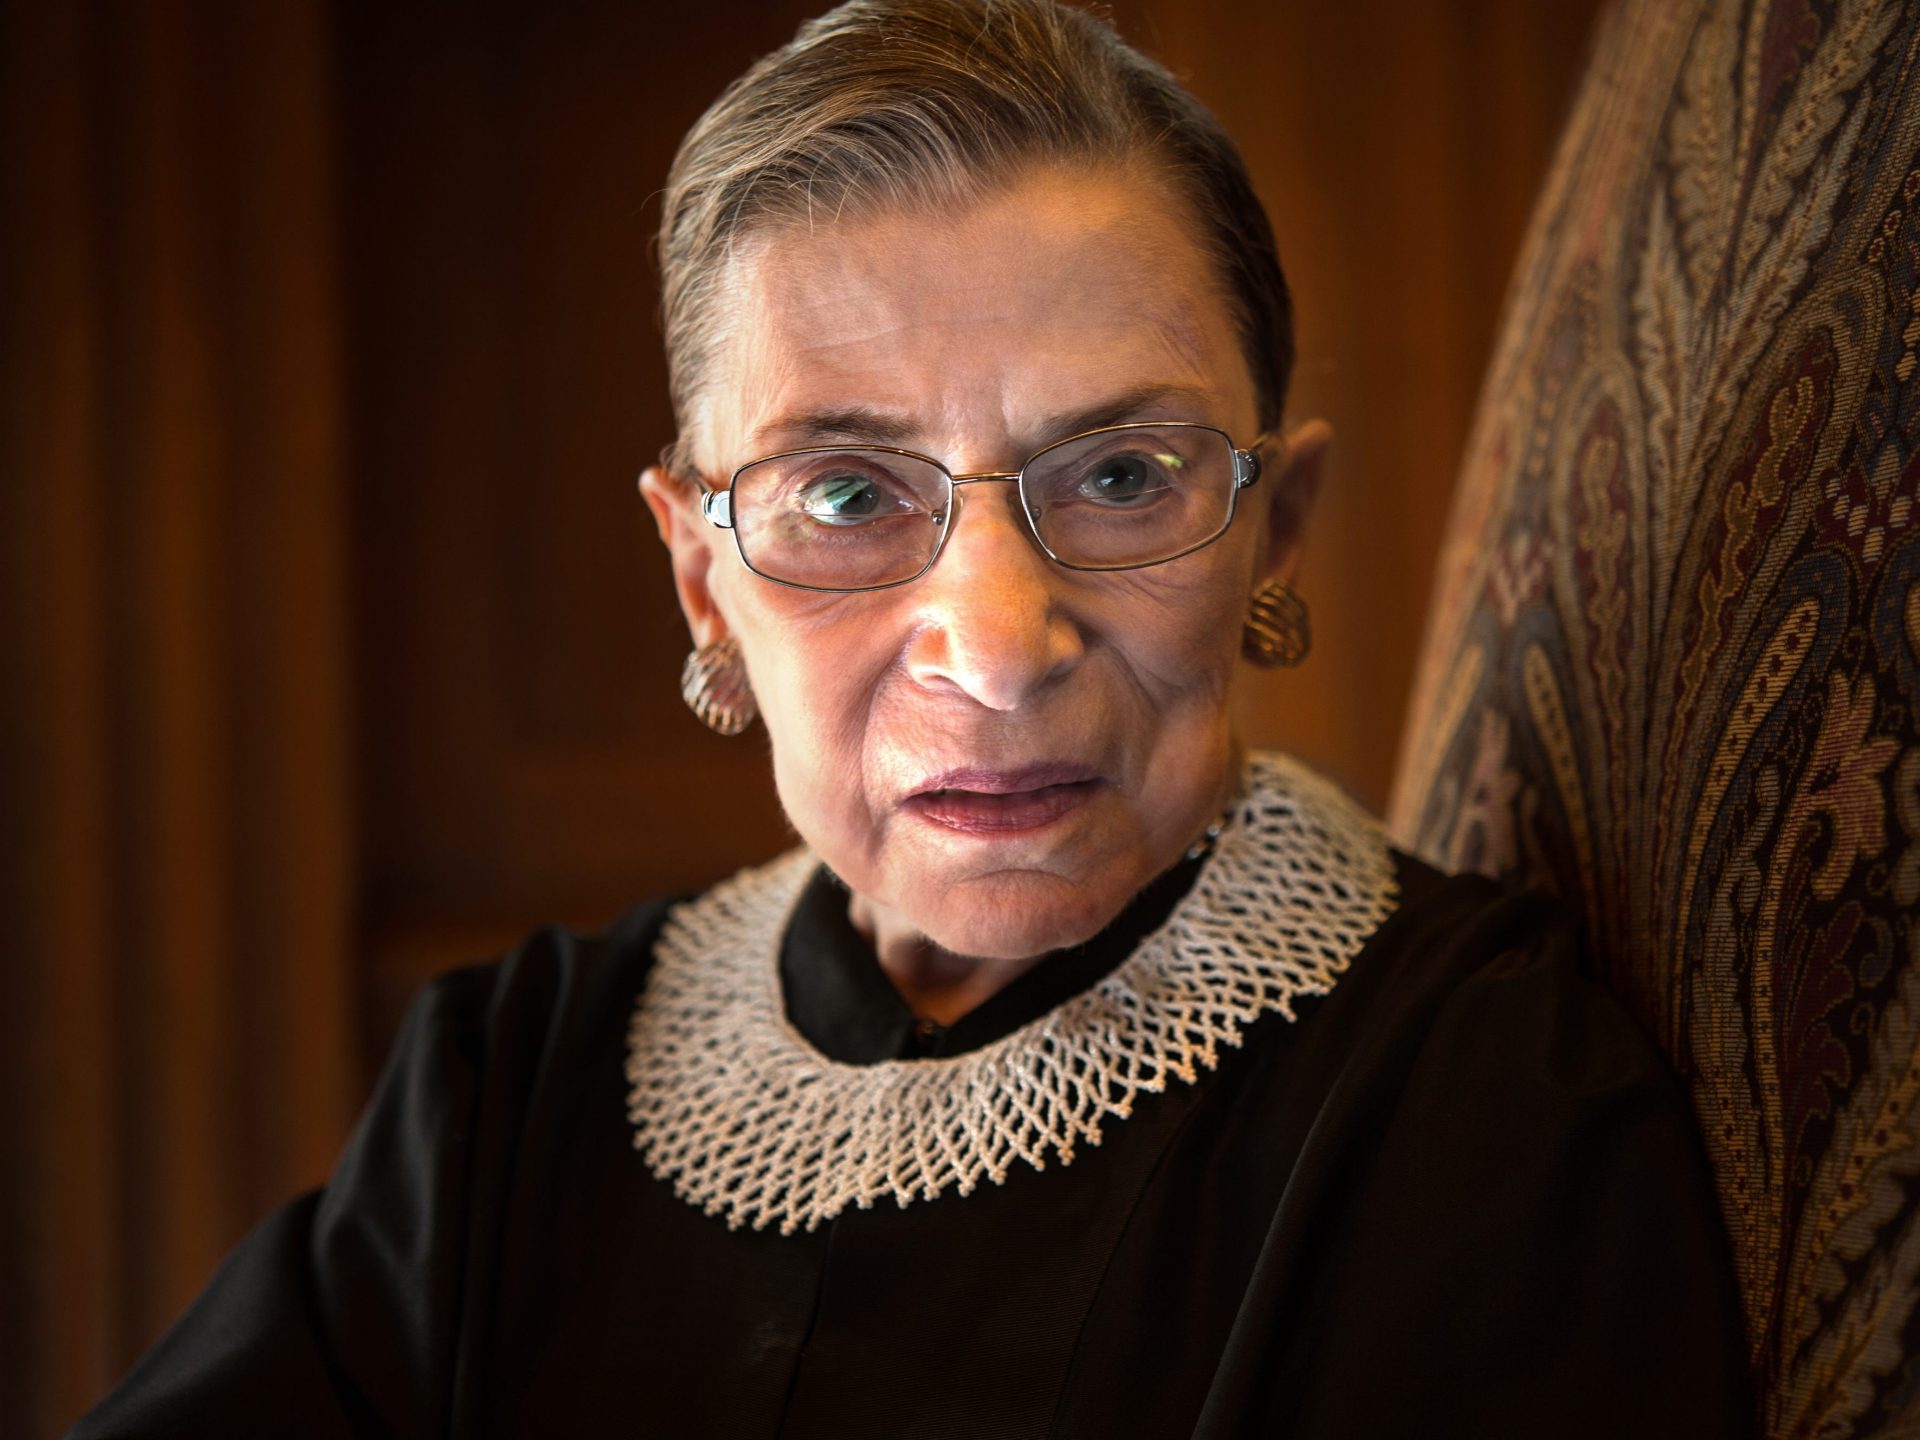 High profile elements are now at stake on the Supreme Court docket in the wake of Ginsburg’s death